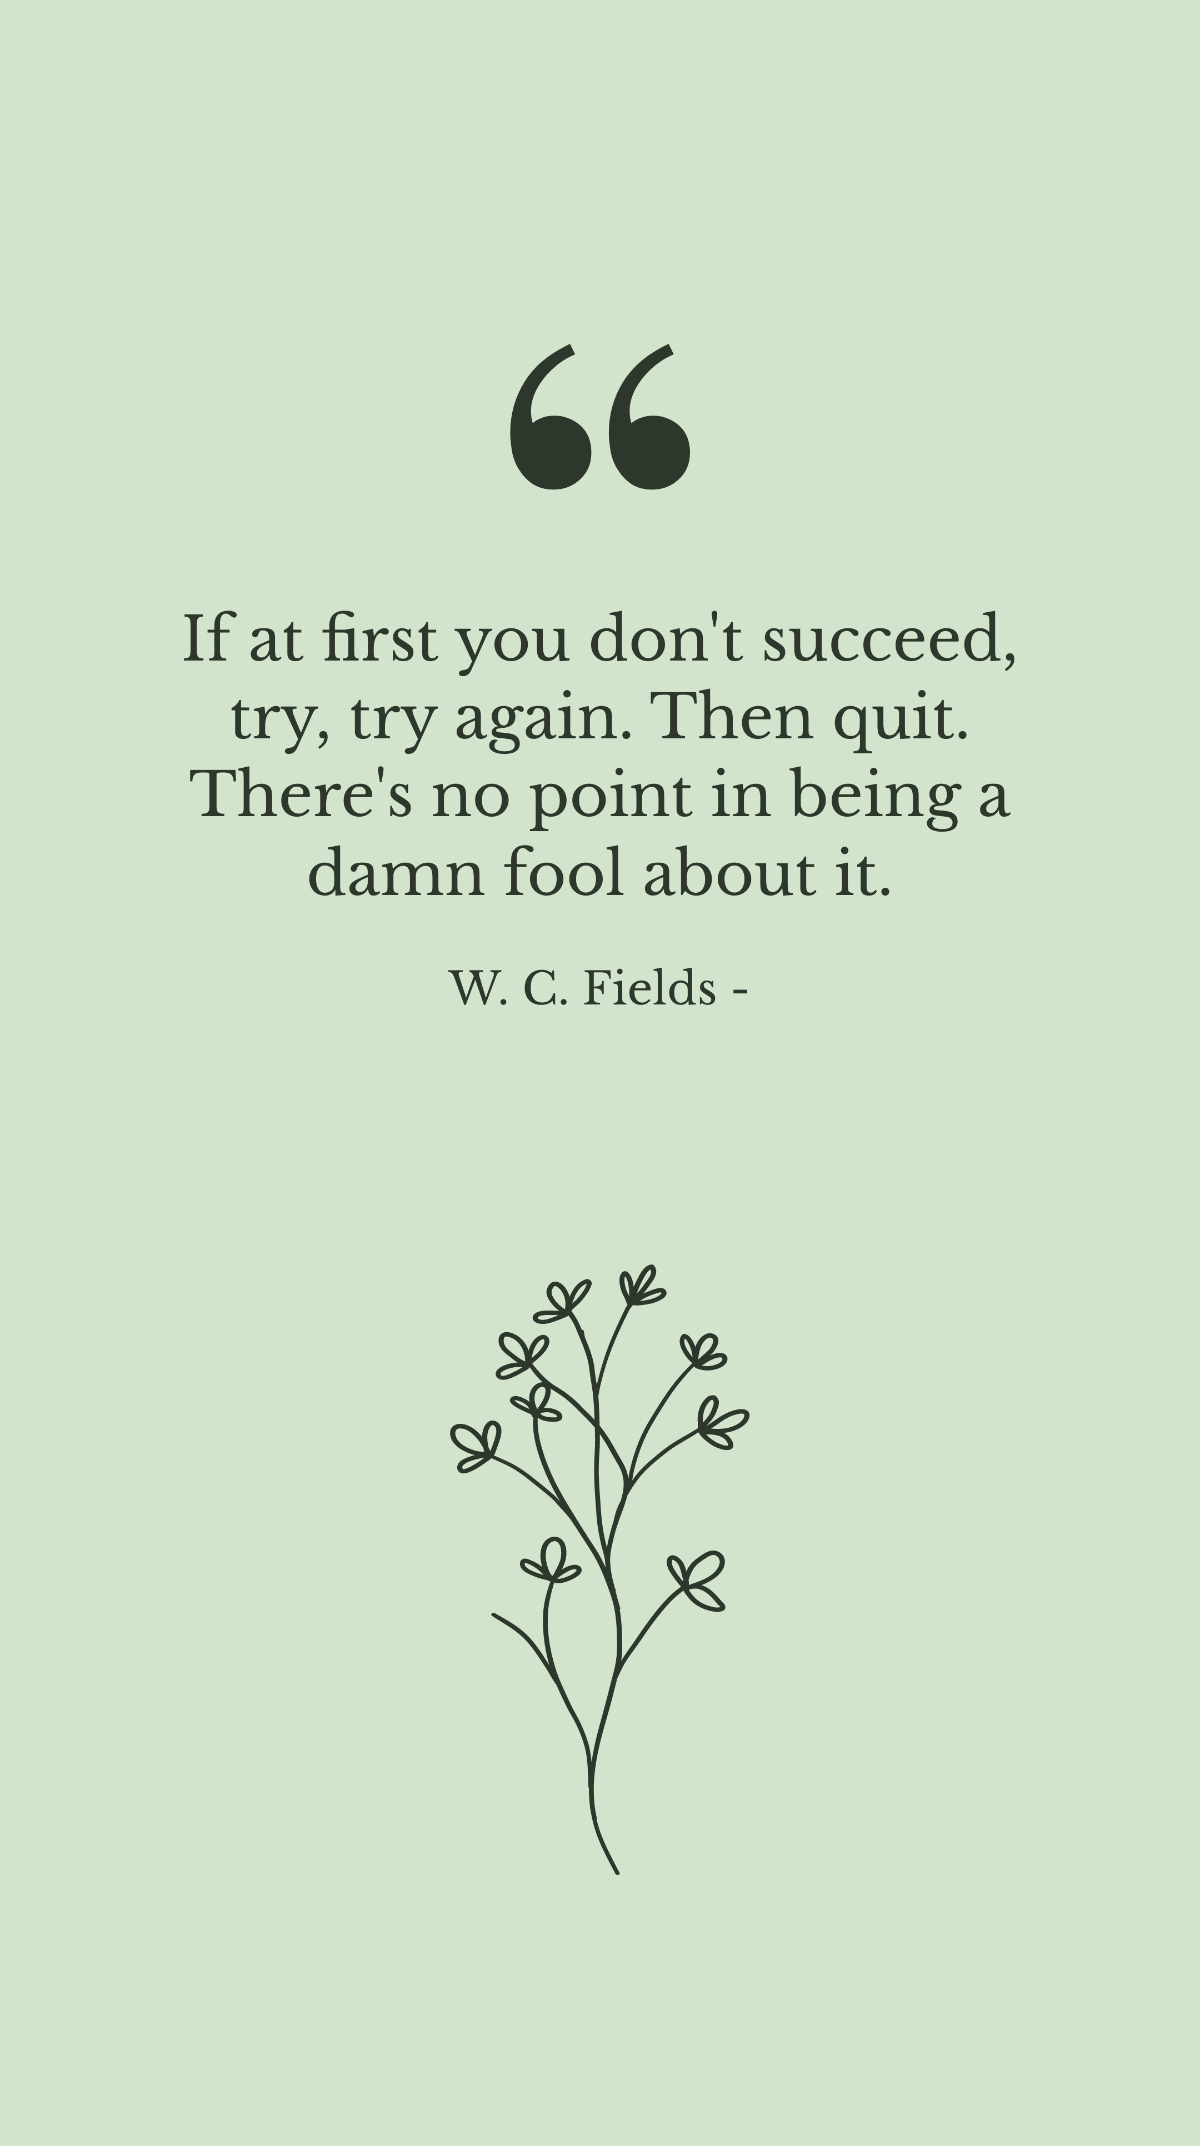 W. C. Fields - If at first you don't succeed, try, try again. Then quit. There's no point in being a damn fool about it.